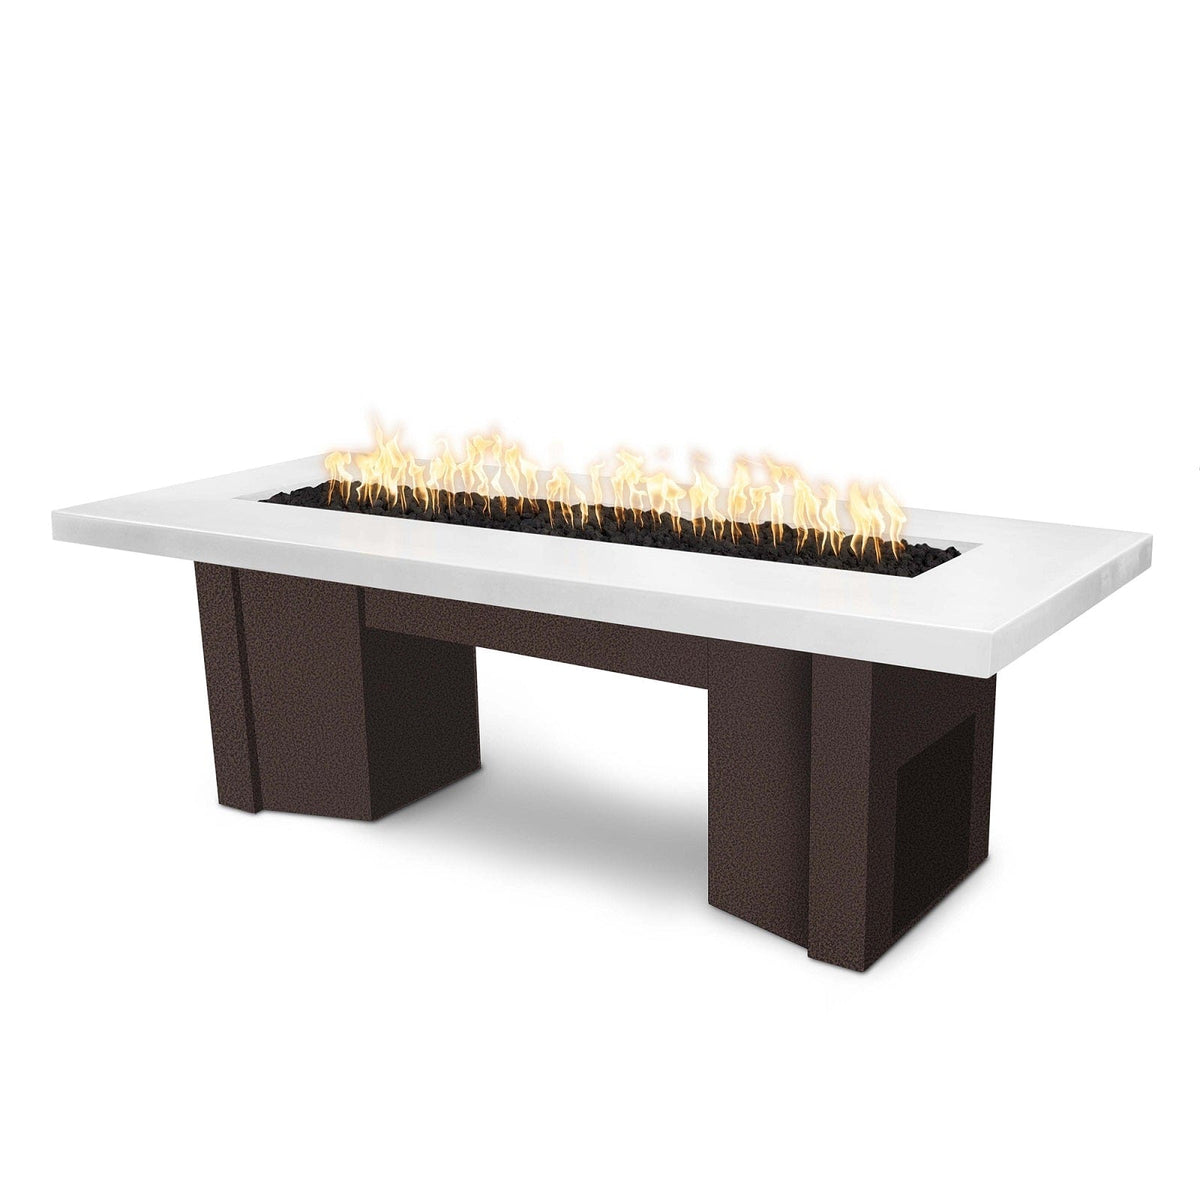 The Outdoor Plus Fire Features Limestone (-LIM) / Copper Vein Powder Coated Steel (-CPV) The Outdoor Plus 60&quot; Alameda Fire Table Smooth Concrete in Natural Gas - Flame Sense System with Push Button Spark Igniter / OPT-ALMGFRC60FSEN-NG